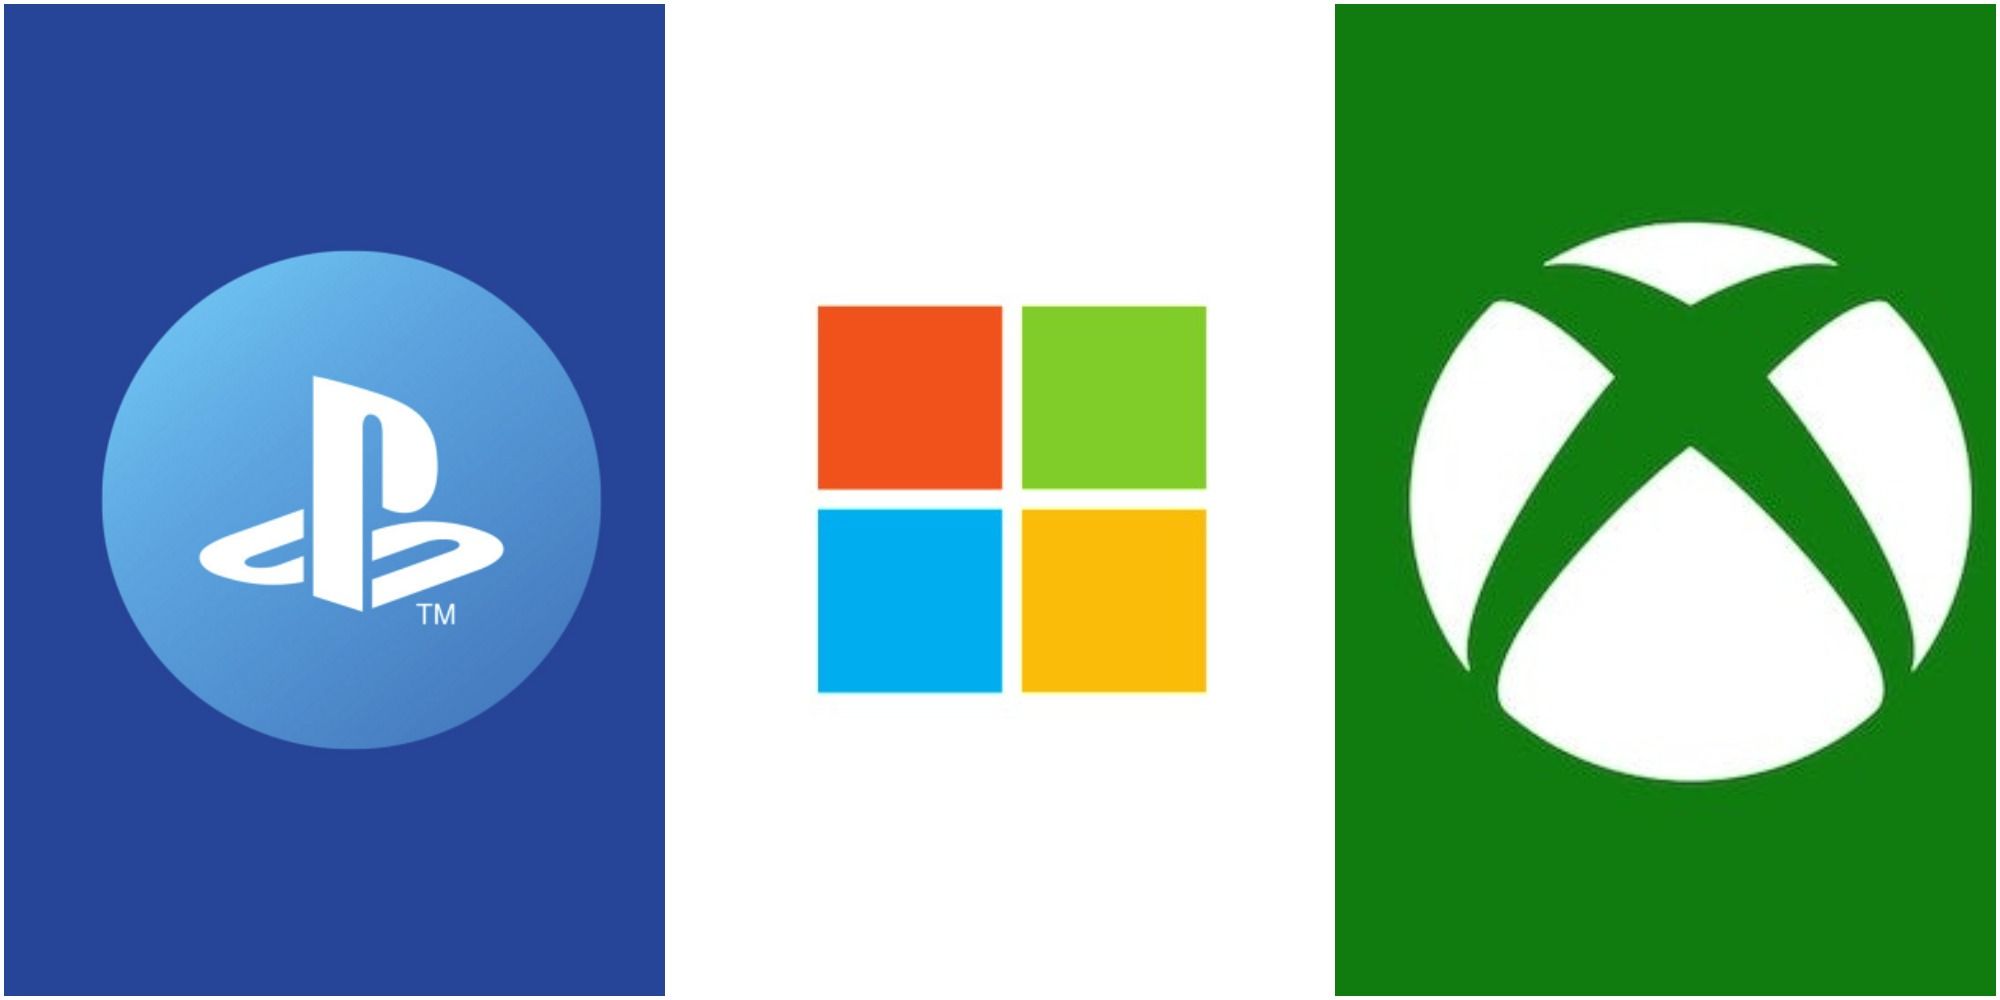 Playstation, Windows, and Xbox Company Logos Side By Side